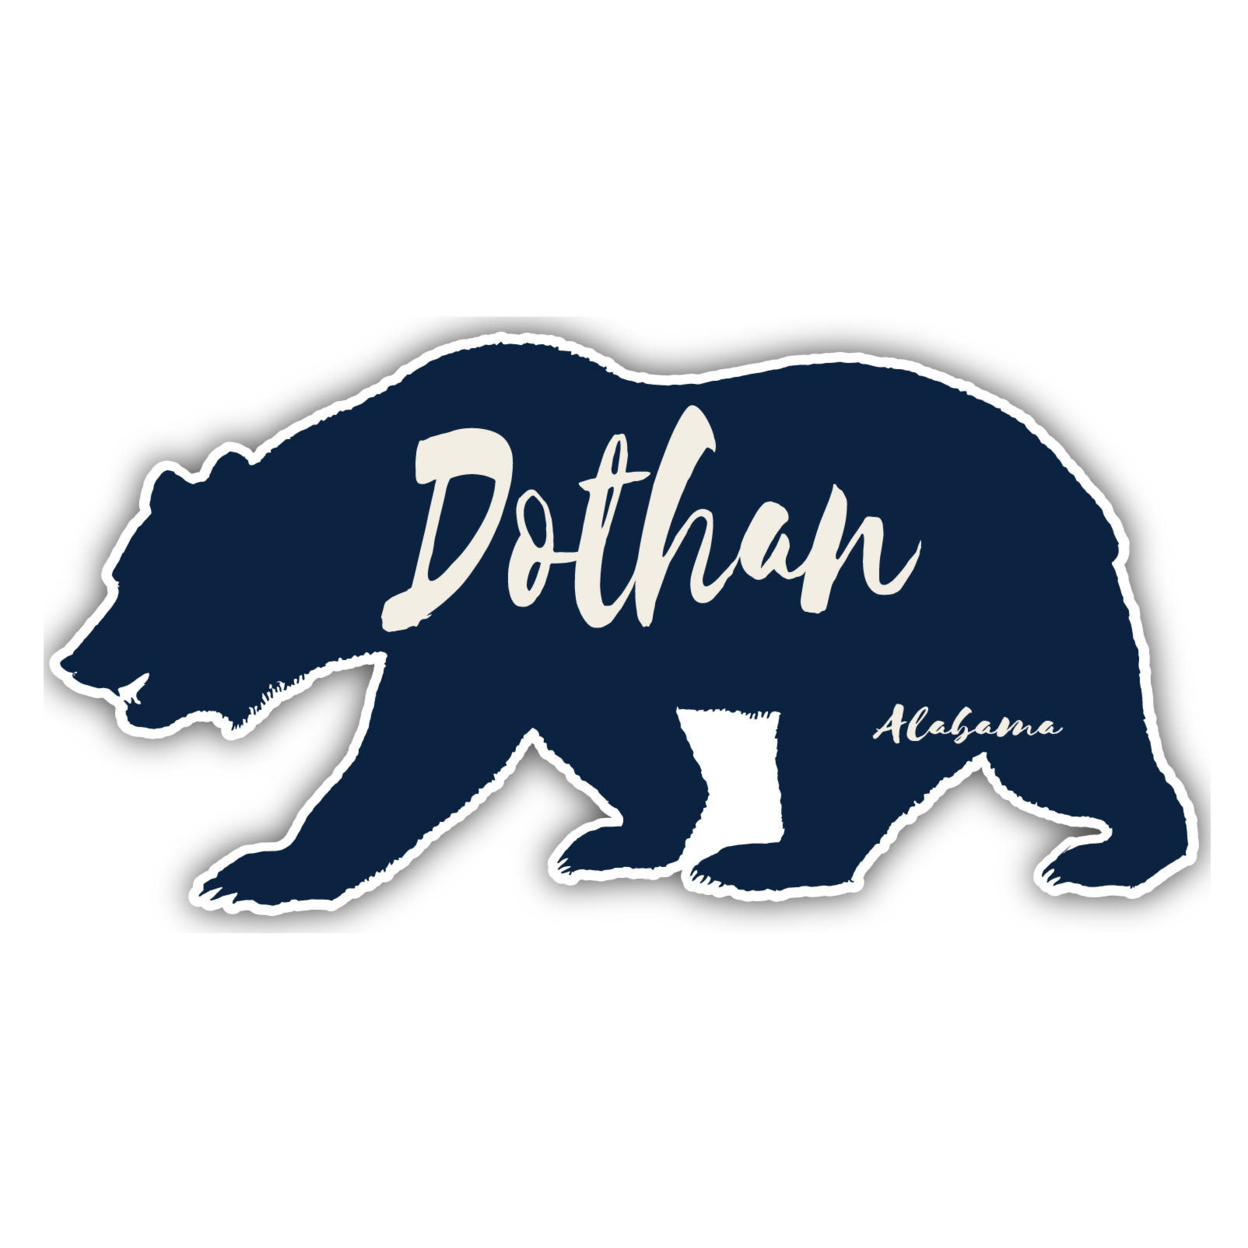 Dothan Alabama Souvenir Decorative Stickers (Choose Theme And Size) - 4-Pack, 8-Inch, Camp Life